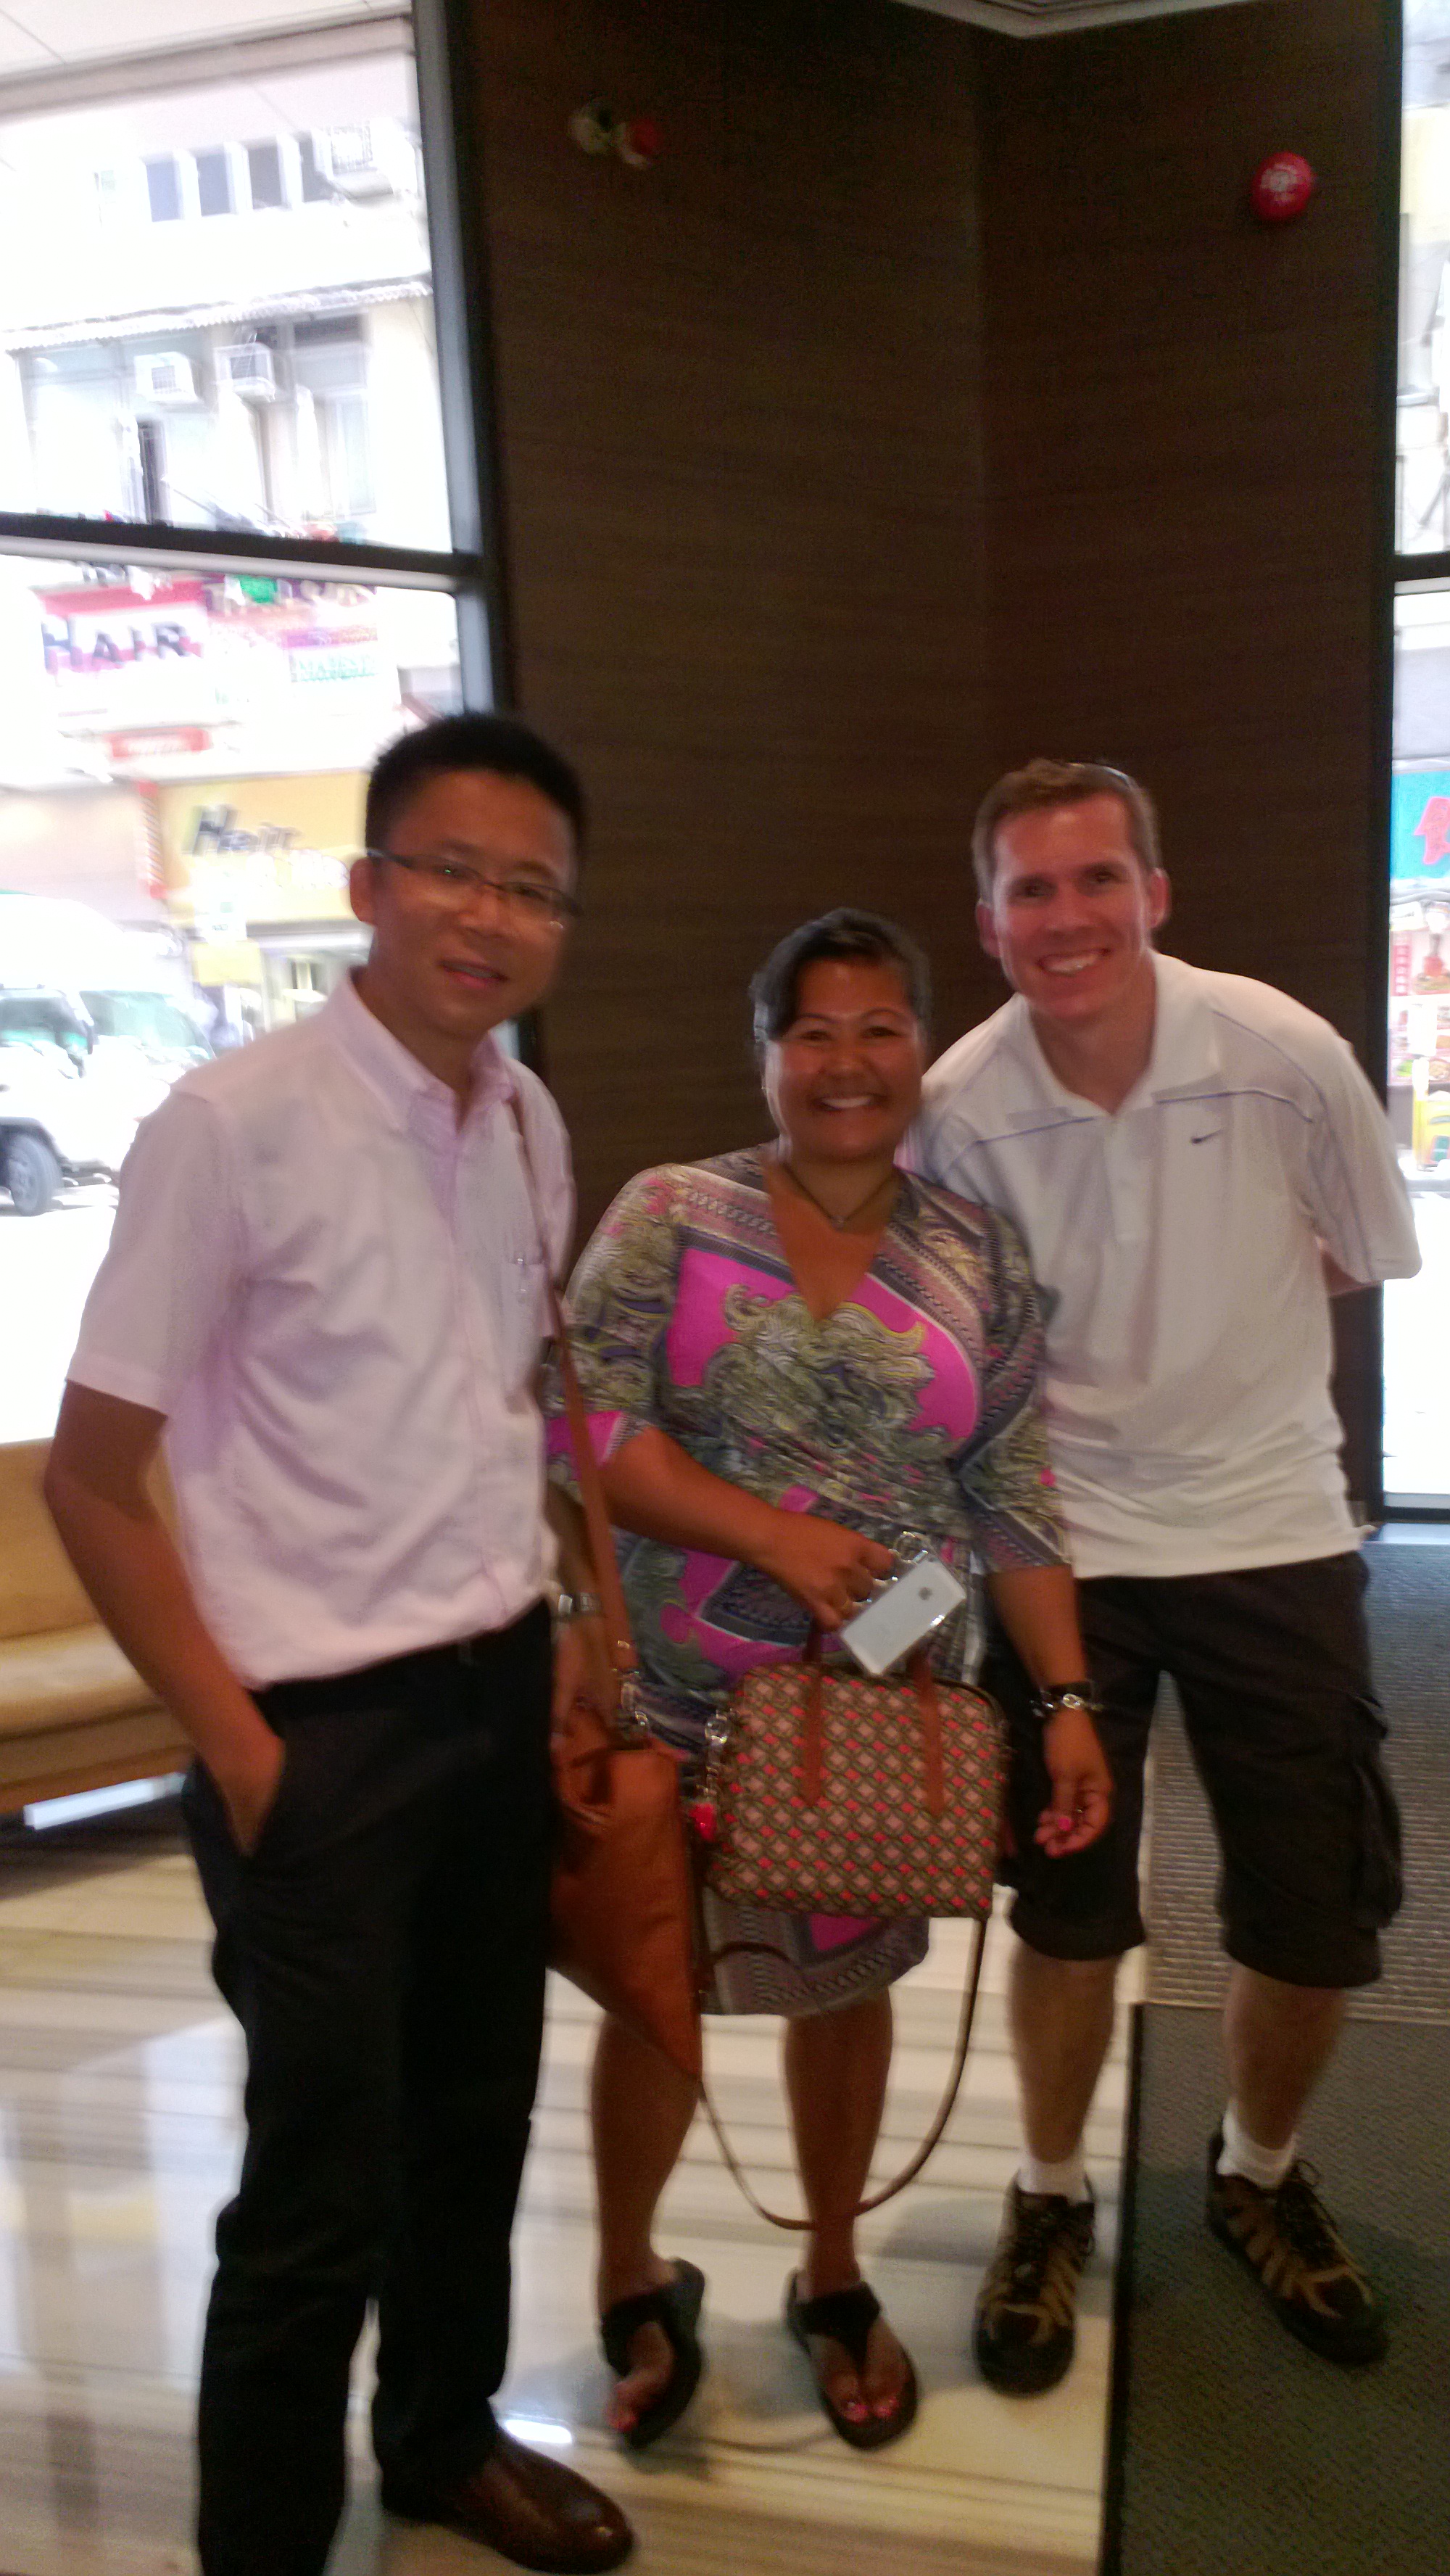 Frank the tour guide takes photo with Isabel M. and her husband at the hotel lobby